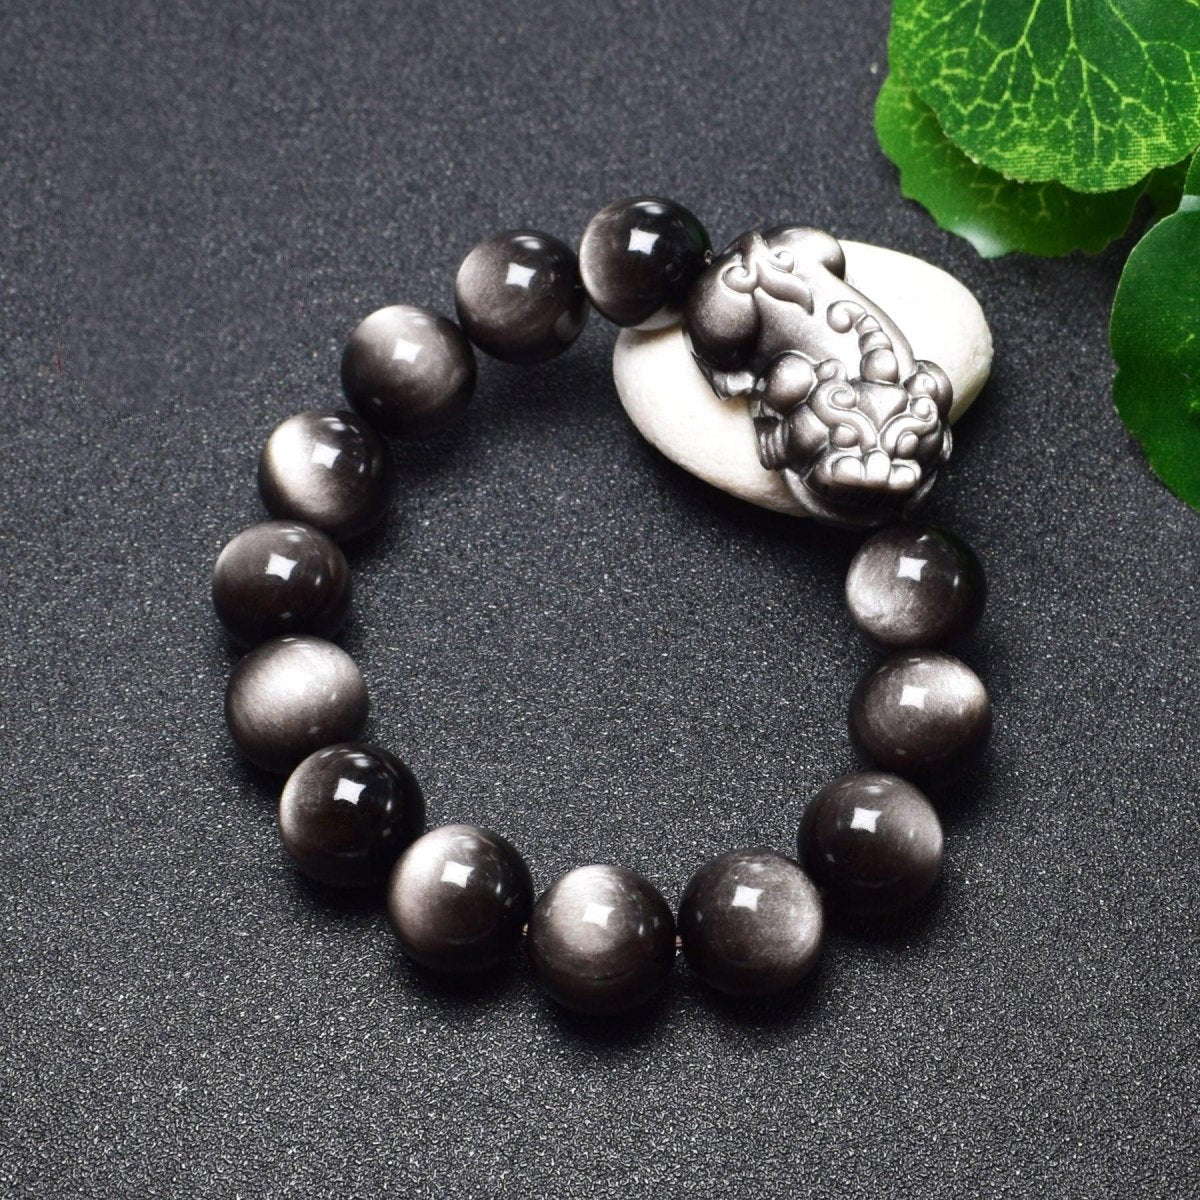 Rare Silver & Stone Pixiu Bracelet: Boost Wealth & Protection | Higher Frequencies - HigherFrequencies